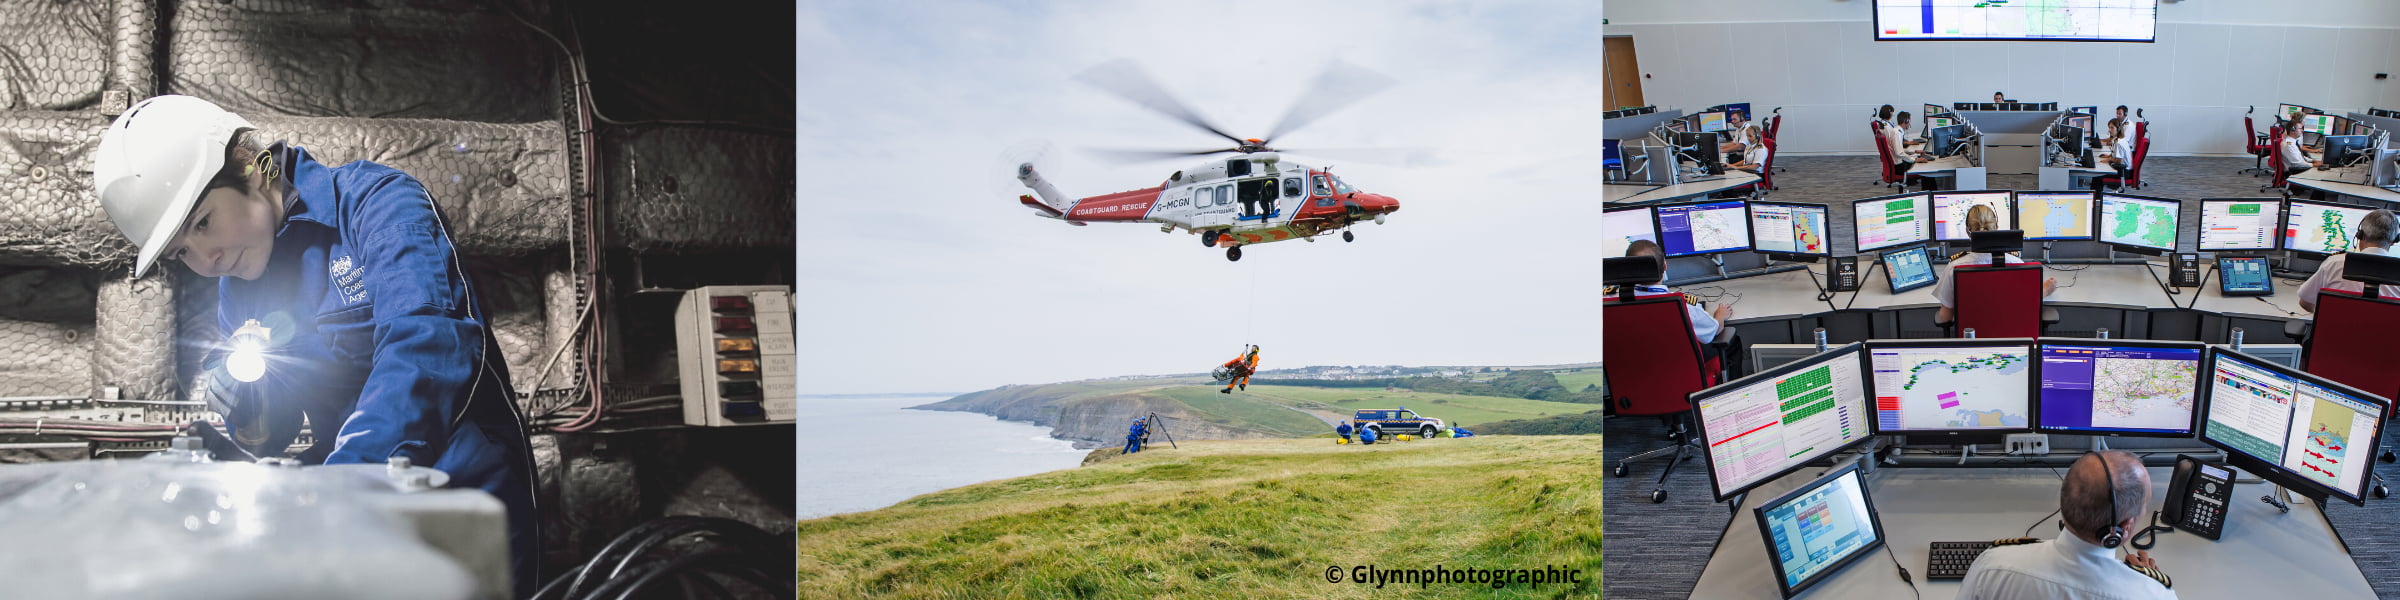 emale engineer, a coastguard helicopter and an office of MCA coastguard staff.